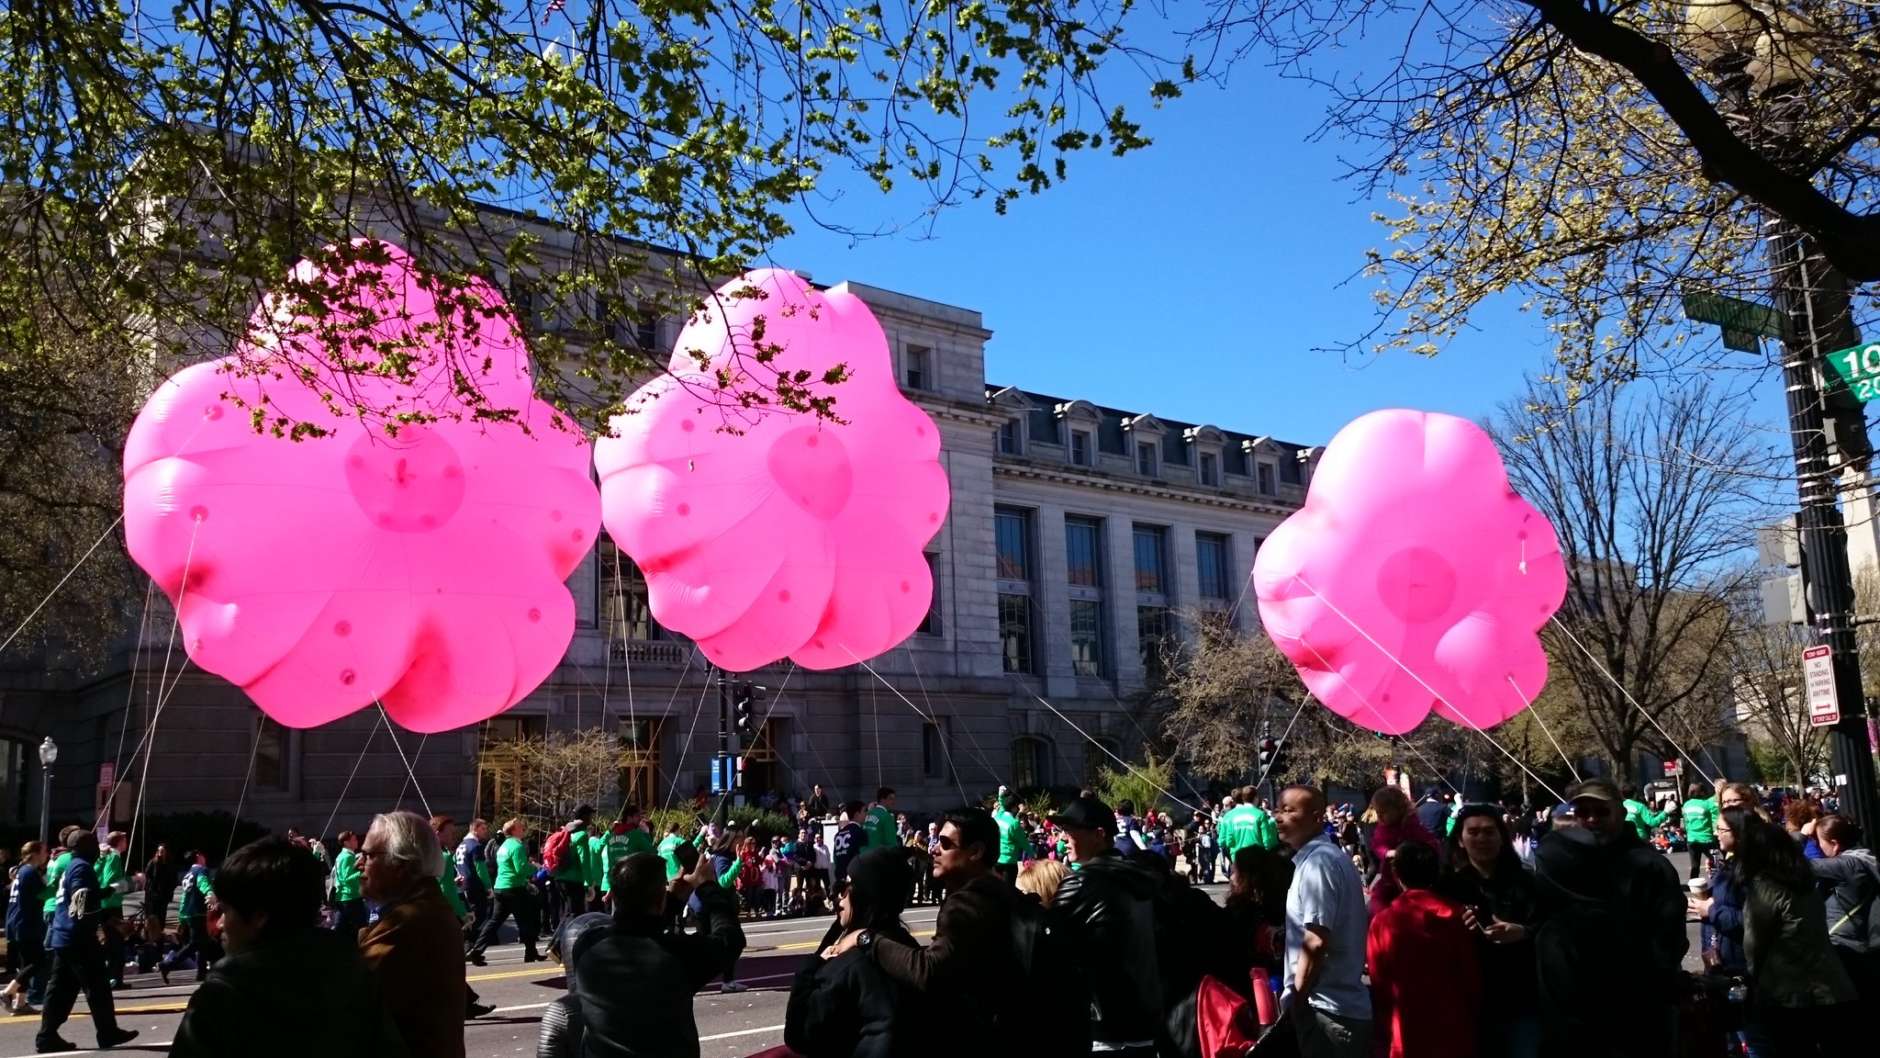 Giant balloons float through the National Cherry Blossom Parade route in 2017. (WTOP/Dennis Foley, file)